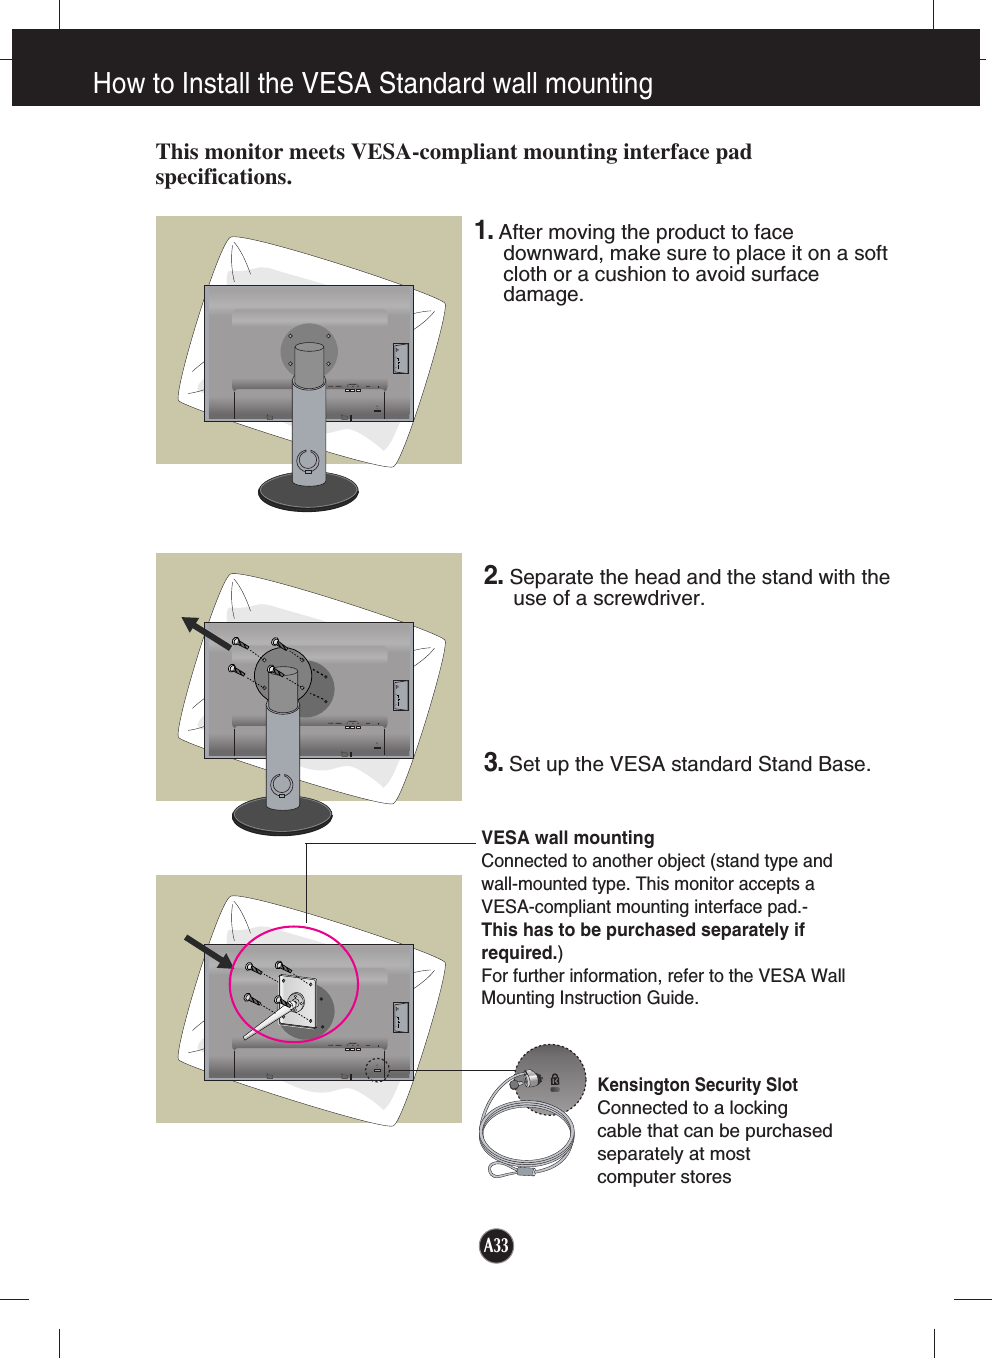 How to Install the VESA Standard wall mountingA33This monitor meets VESA-compliant mounting interface padspecifications.DC-OUT HDMI/DVICOMPONENTAUDIOOUTD-SUBYPRPB   1                          2DC-OUT HDMI/DVICOMPONENTAUDIOOUTD-SUBYPRPB   1                          2DC-OUT HDMI/DVICOMPONENTAUDIOOUTD-SUBYPRPB   1                          2VESA wall mountingConnected to another object (stand type andwall-mounted type. This monitor accepts aVESA-compliant mounting interface pad.-This has to be purchased separately ifrequired.)For further information, refer to the VESA WallMounting Instruction Guide.Kensington Security SlotConnected to a locking cable that can be purchasedseparately at most computer stores1.After moving the product to facedownward, make sure to place it on a softcloth or a cushion to avoid surfacedamage.  2. Separate the head and the stand with theuse of a screwdriver.3.Set up the VESA standard Stand Base.